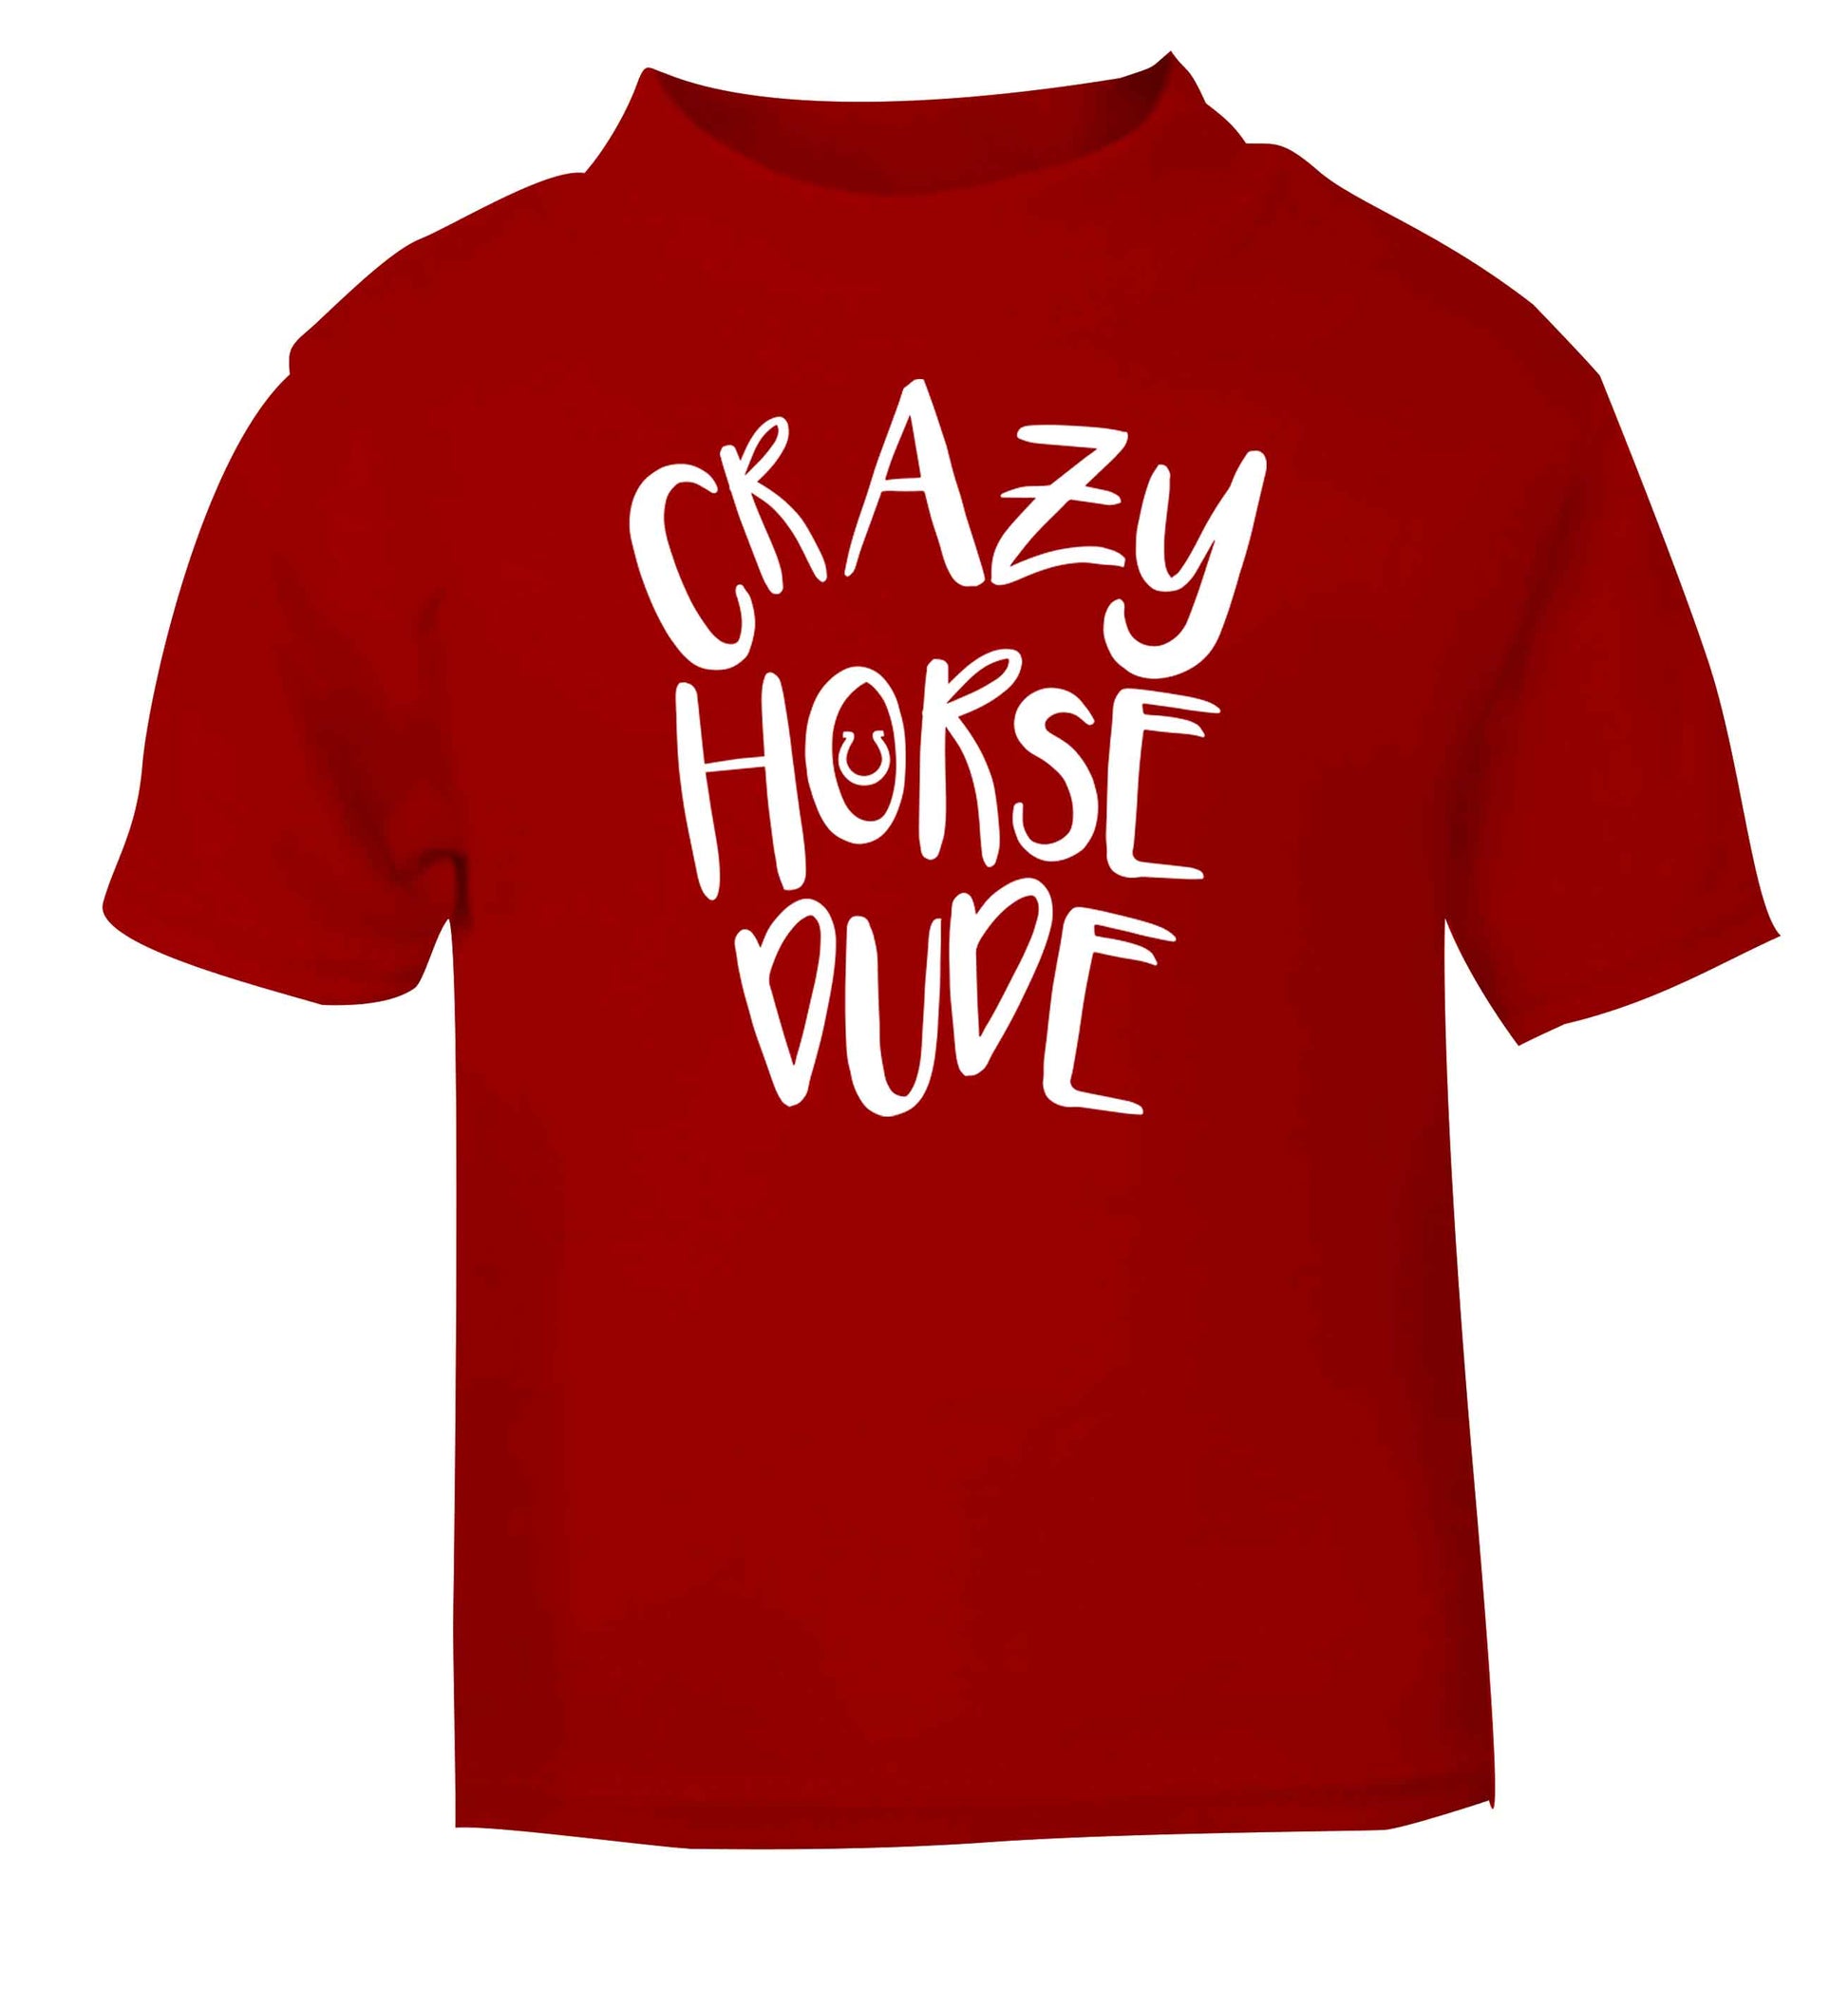 Crazy horse dude red baby toddler Tshirt 2 Years